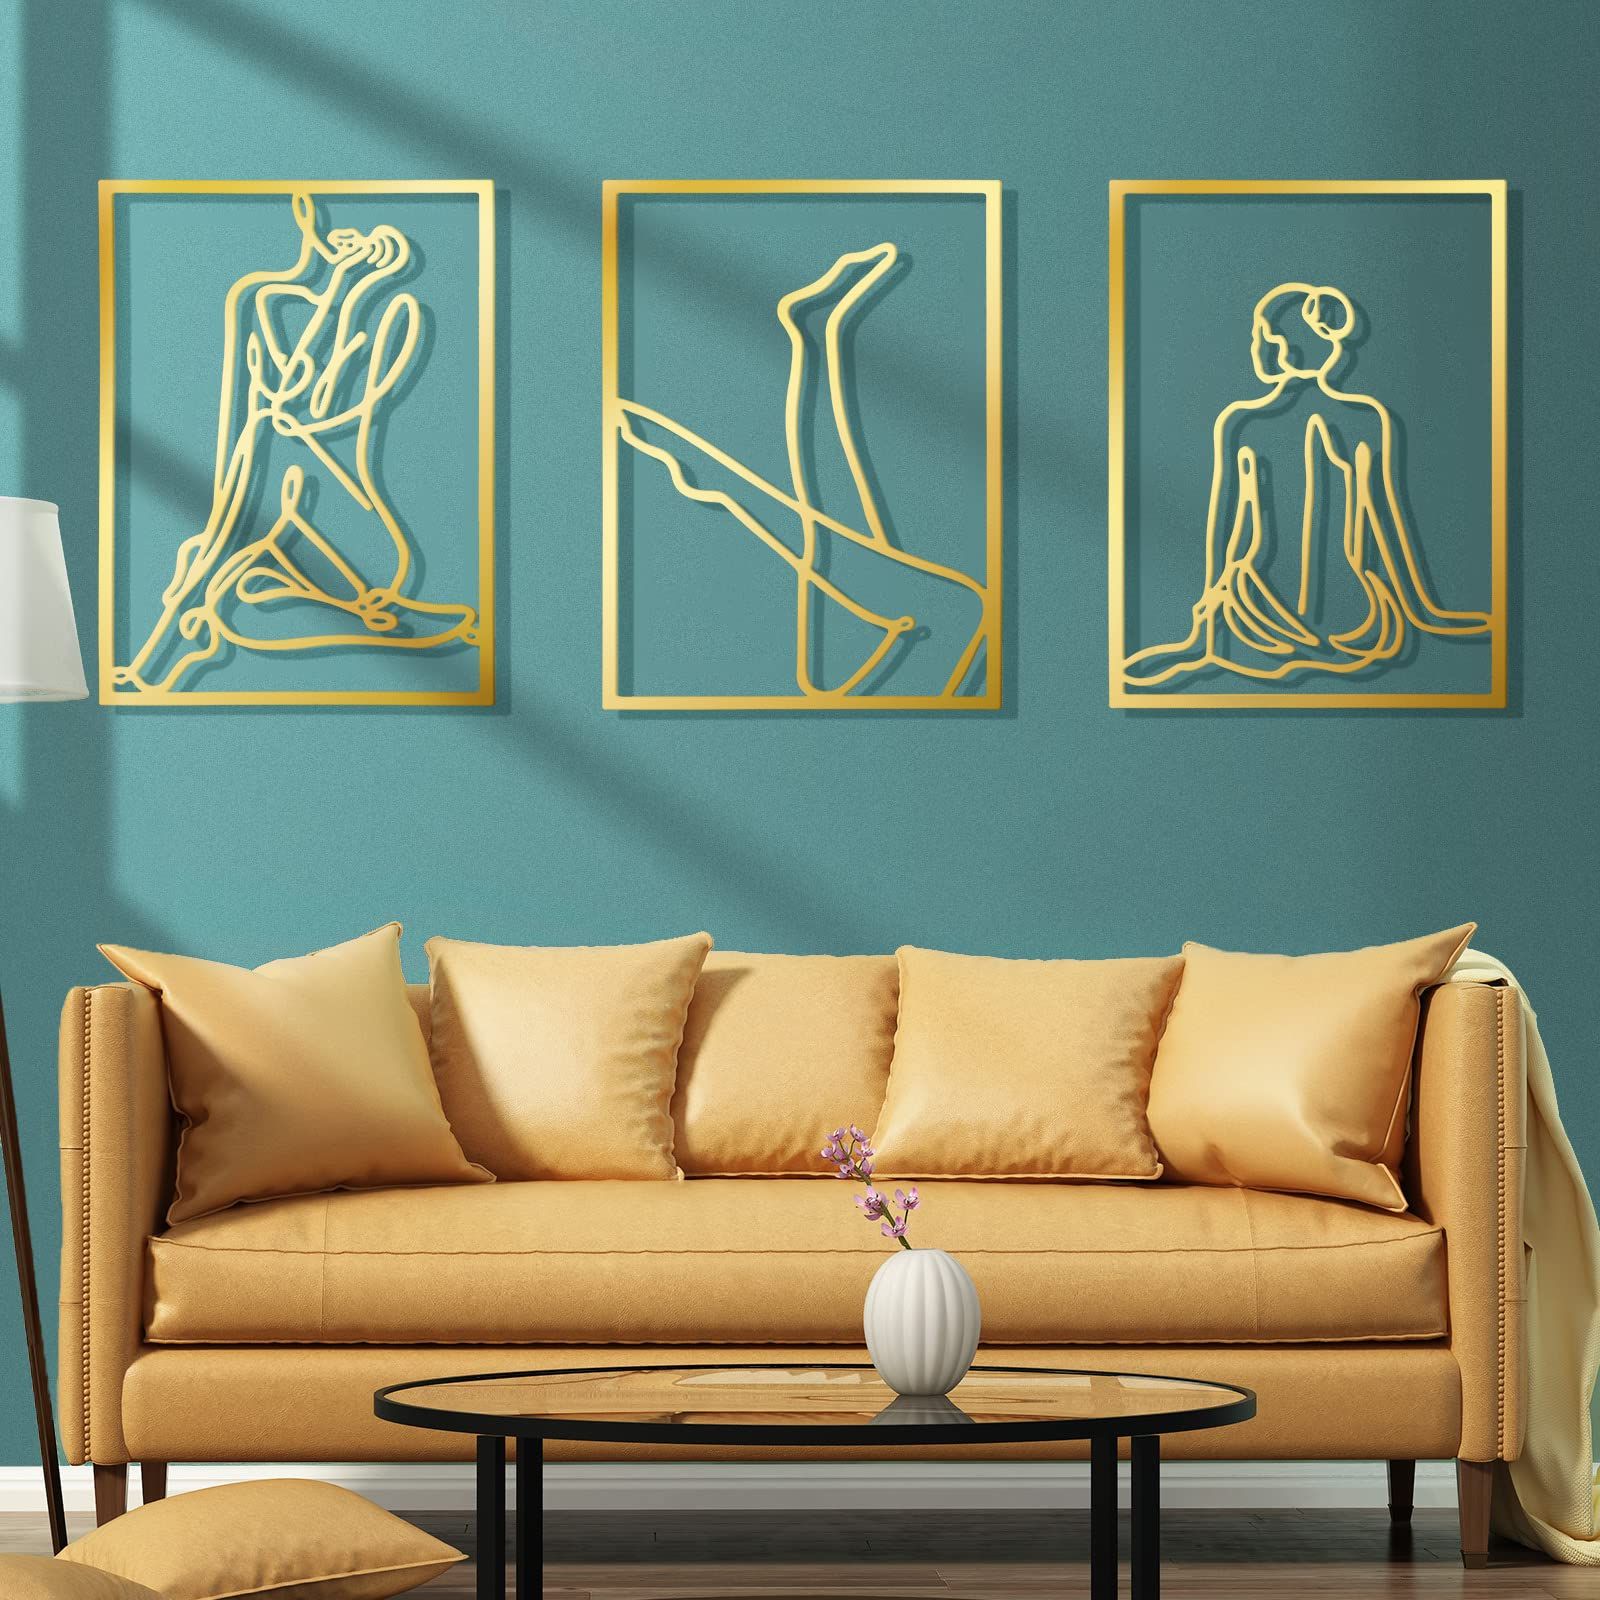 Trendy Large Single Line Metal Wall Art For Amazon: Set Of 3 Metal Wall Art Decor 15x12 Inch Modern Abstract Wall  Art Minimalist Wall Decor Large Rustic Wall Sculptures Single Line Decor  Accents Hanging Women's Body Outline Poster (gold, Modern (Photo 10 of 15)